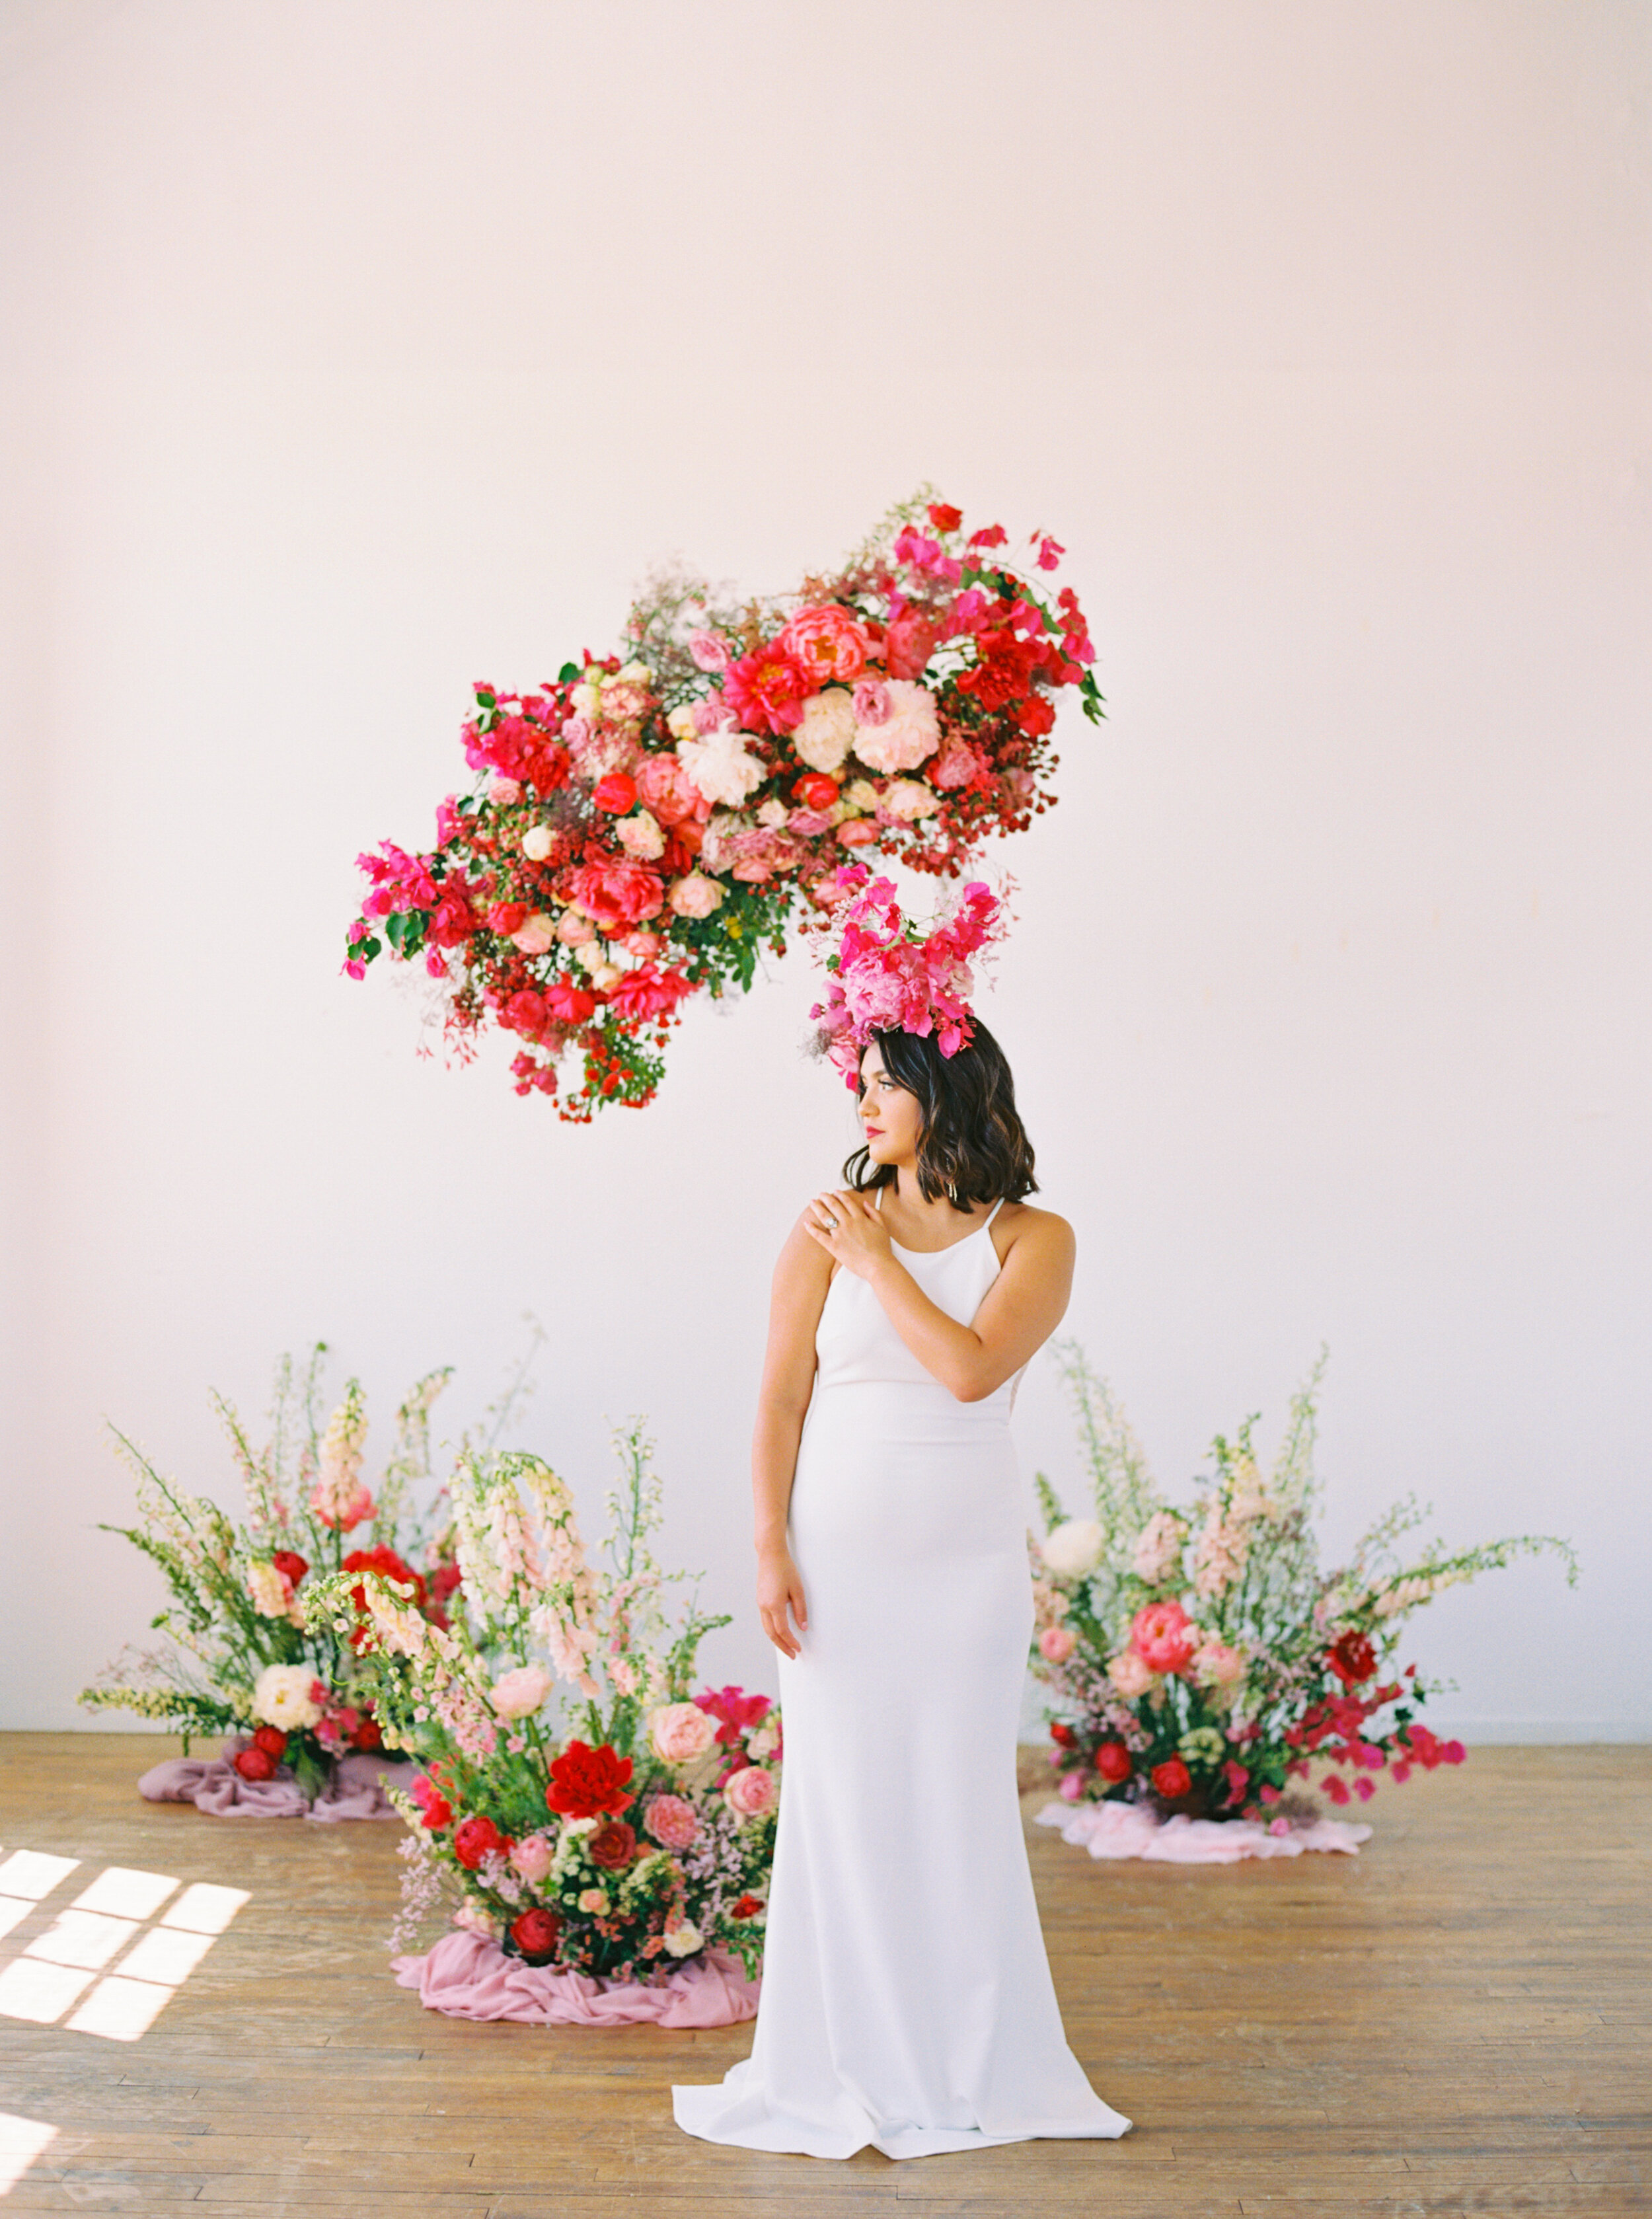 A Romantic Wedding Elopement Filled with Colorful Fuchsia - Sarahi Hadden Submission-48.jpg